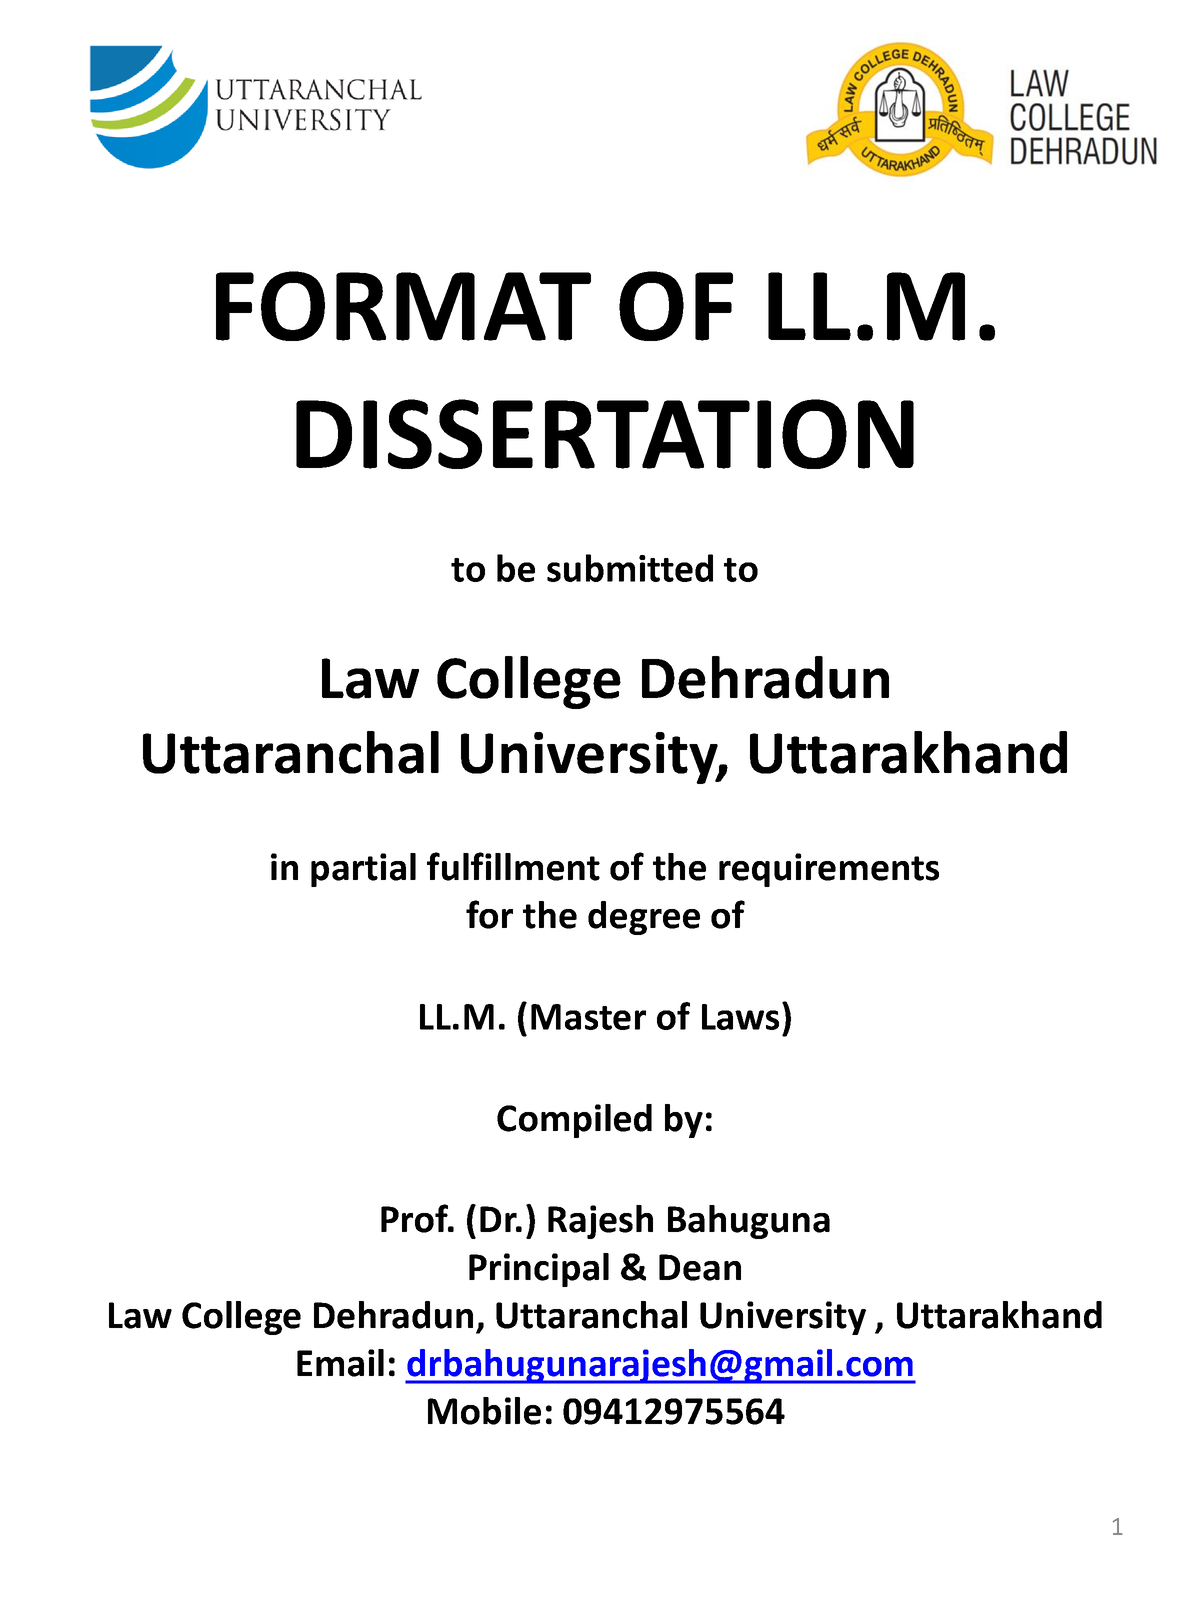 thesis of llm